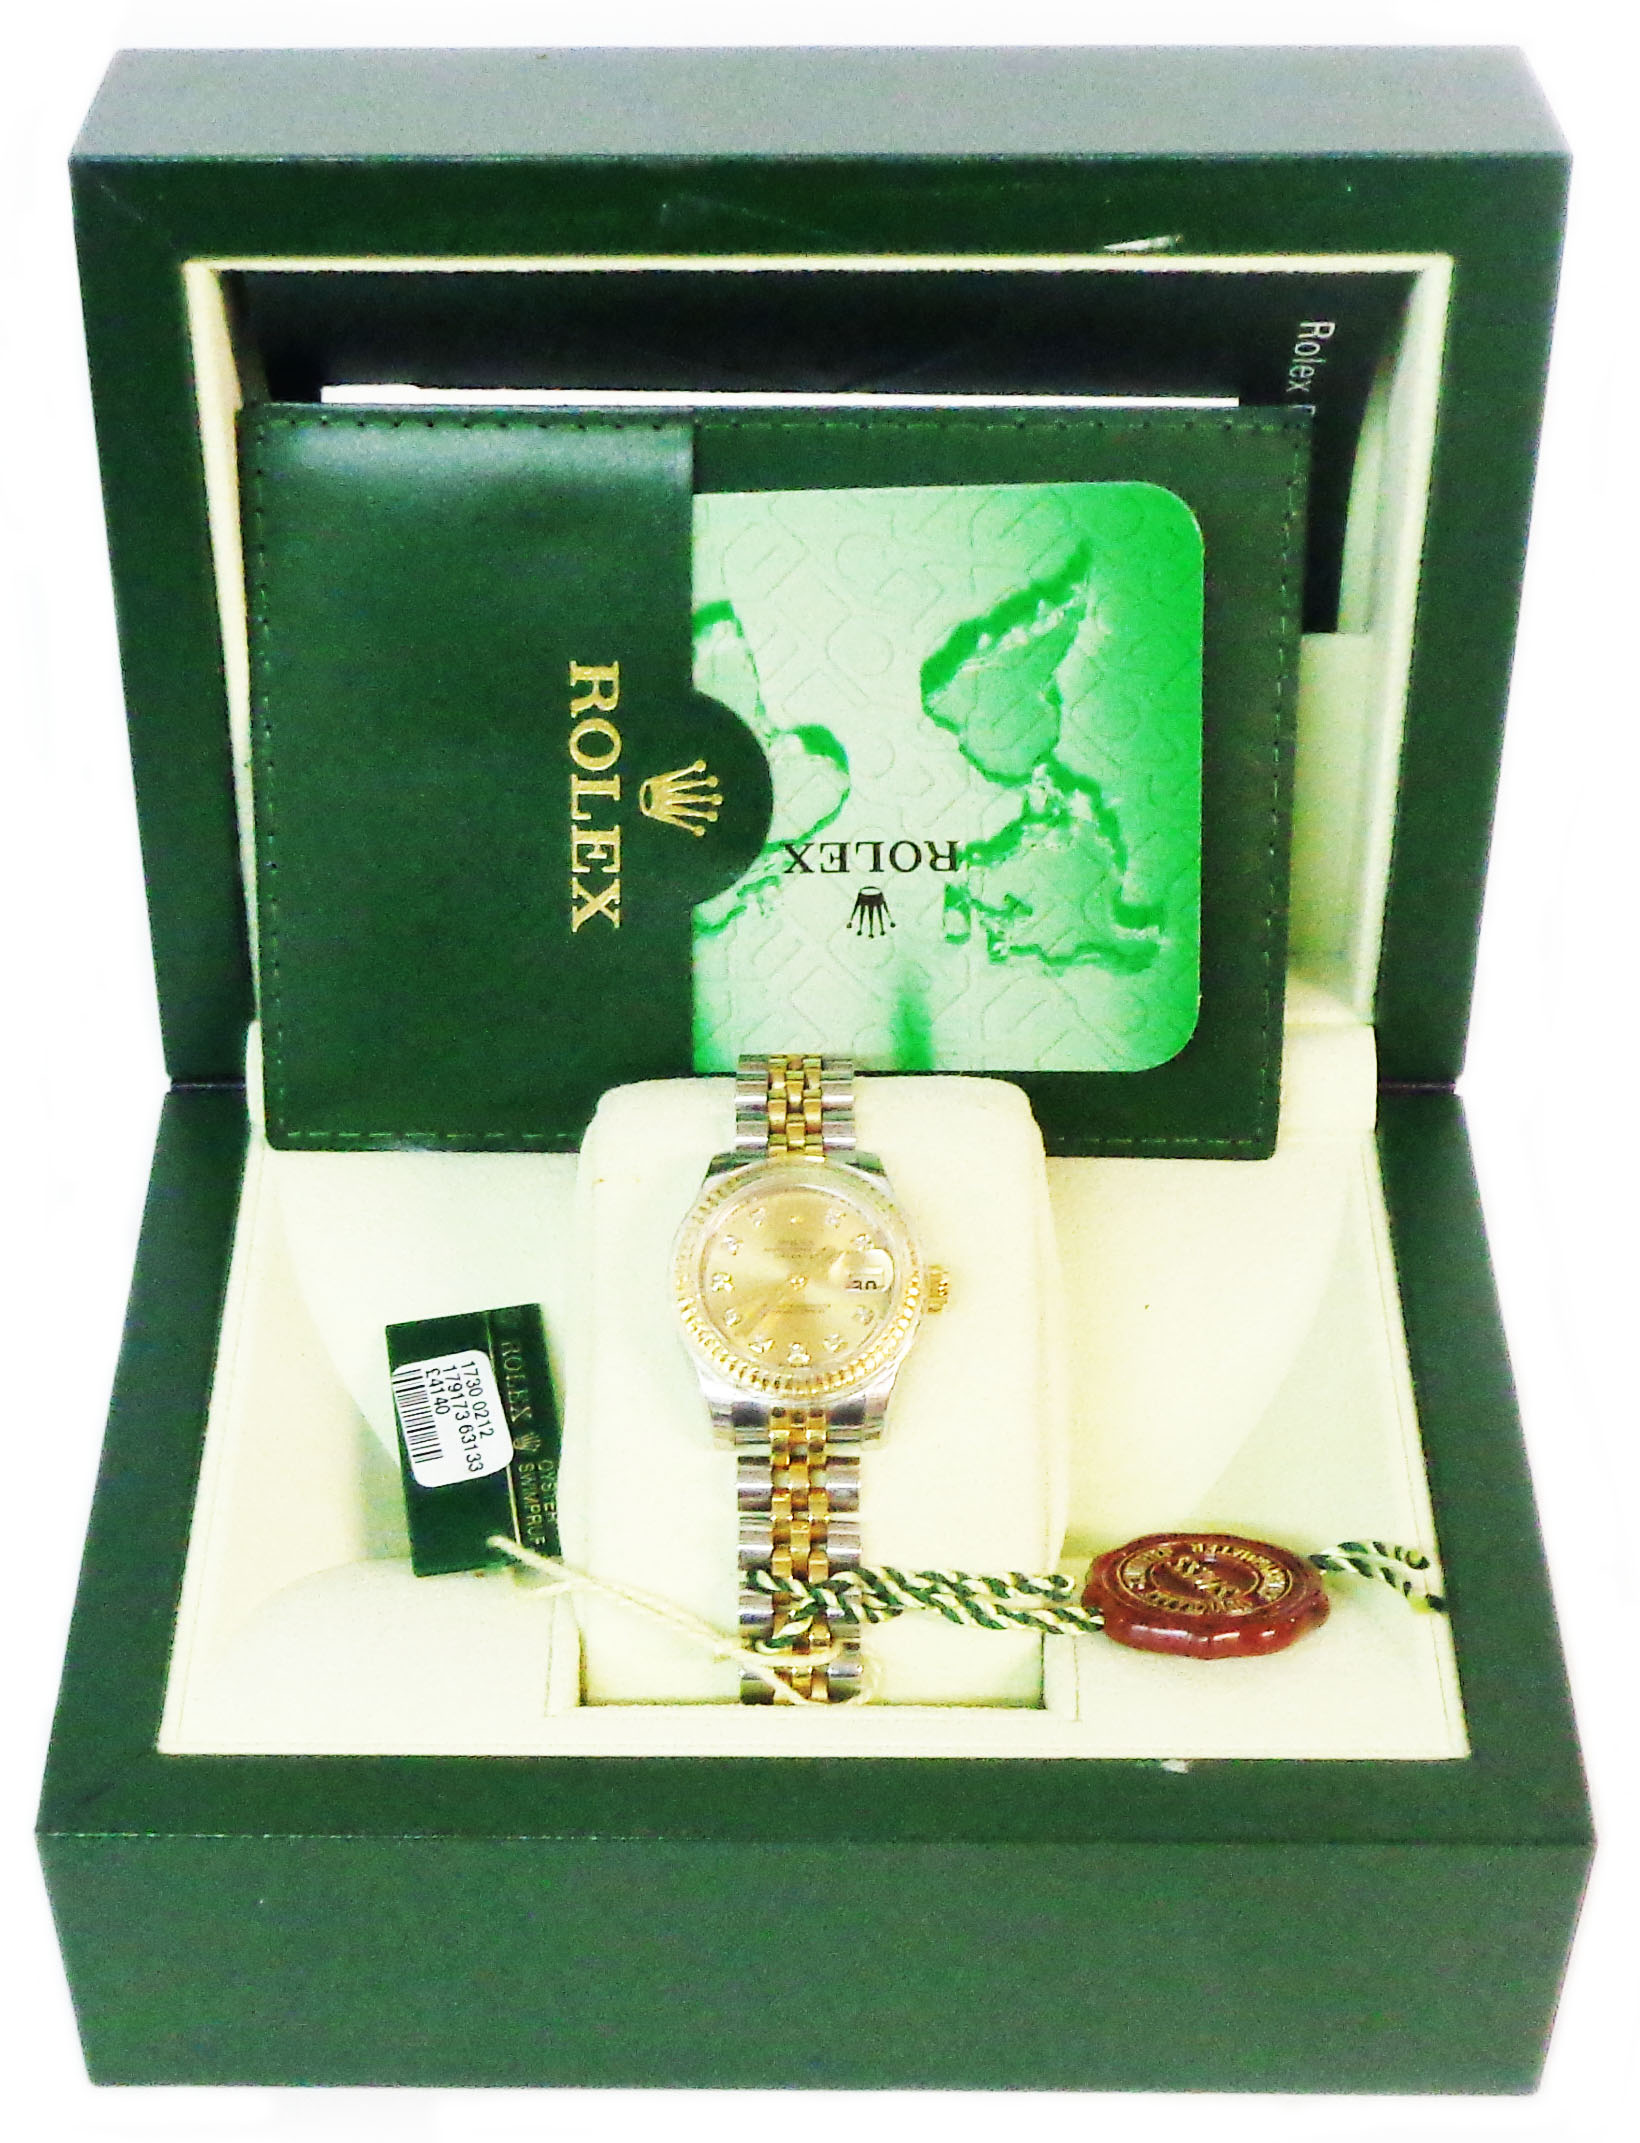 A 2007 Rolex Oyster Perpetual Datejust lady's bi-metal wristwatch with diamond set numeral